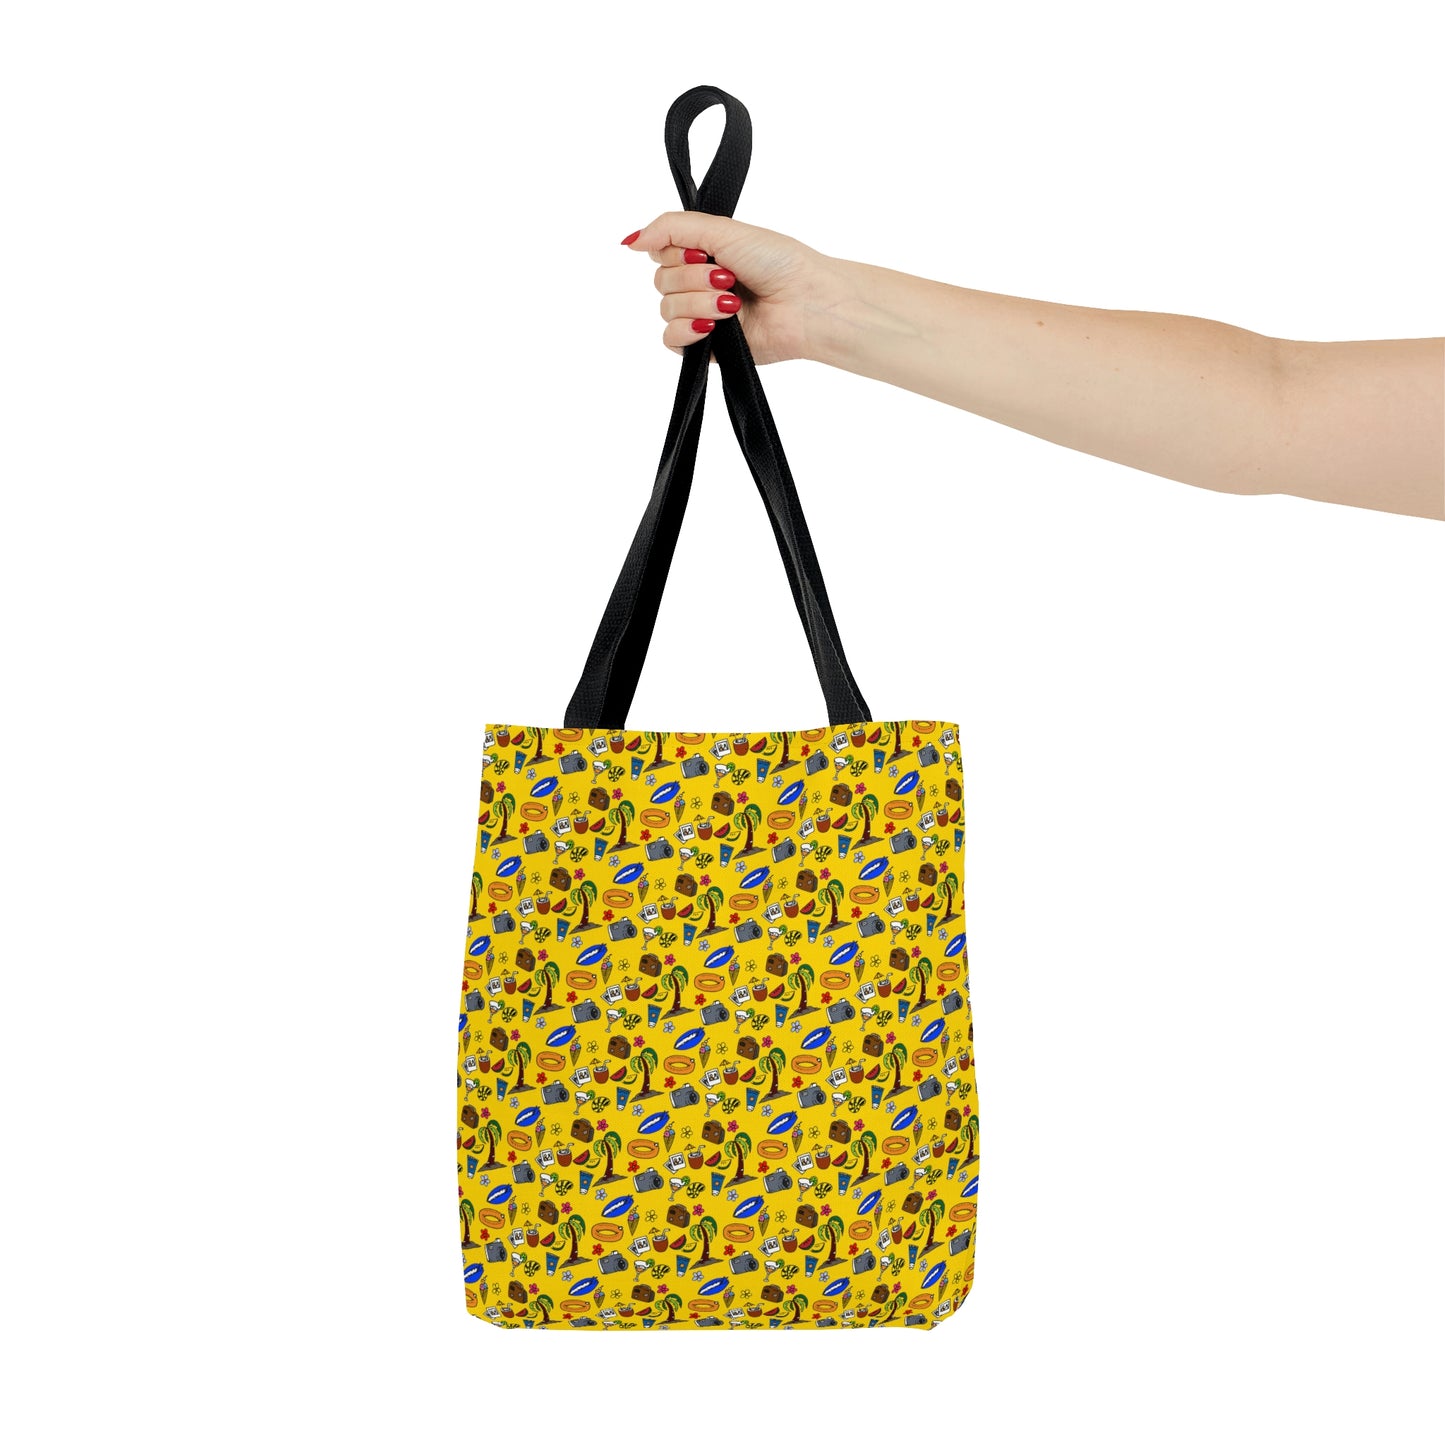 Summer doodles - yellow ffd800  - Tote Bag